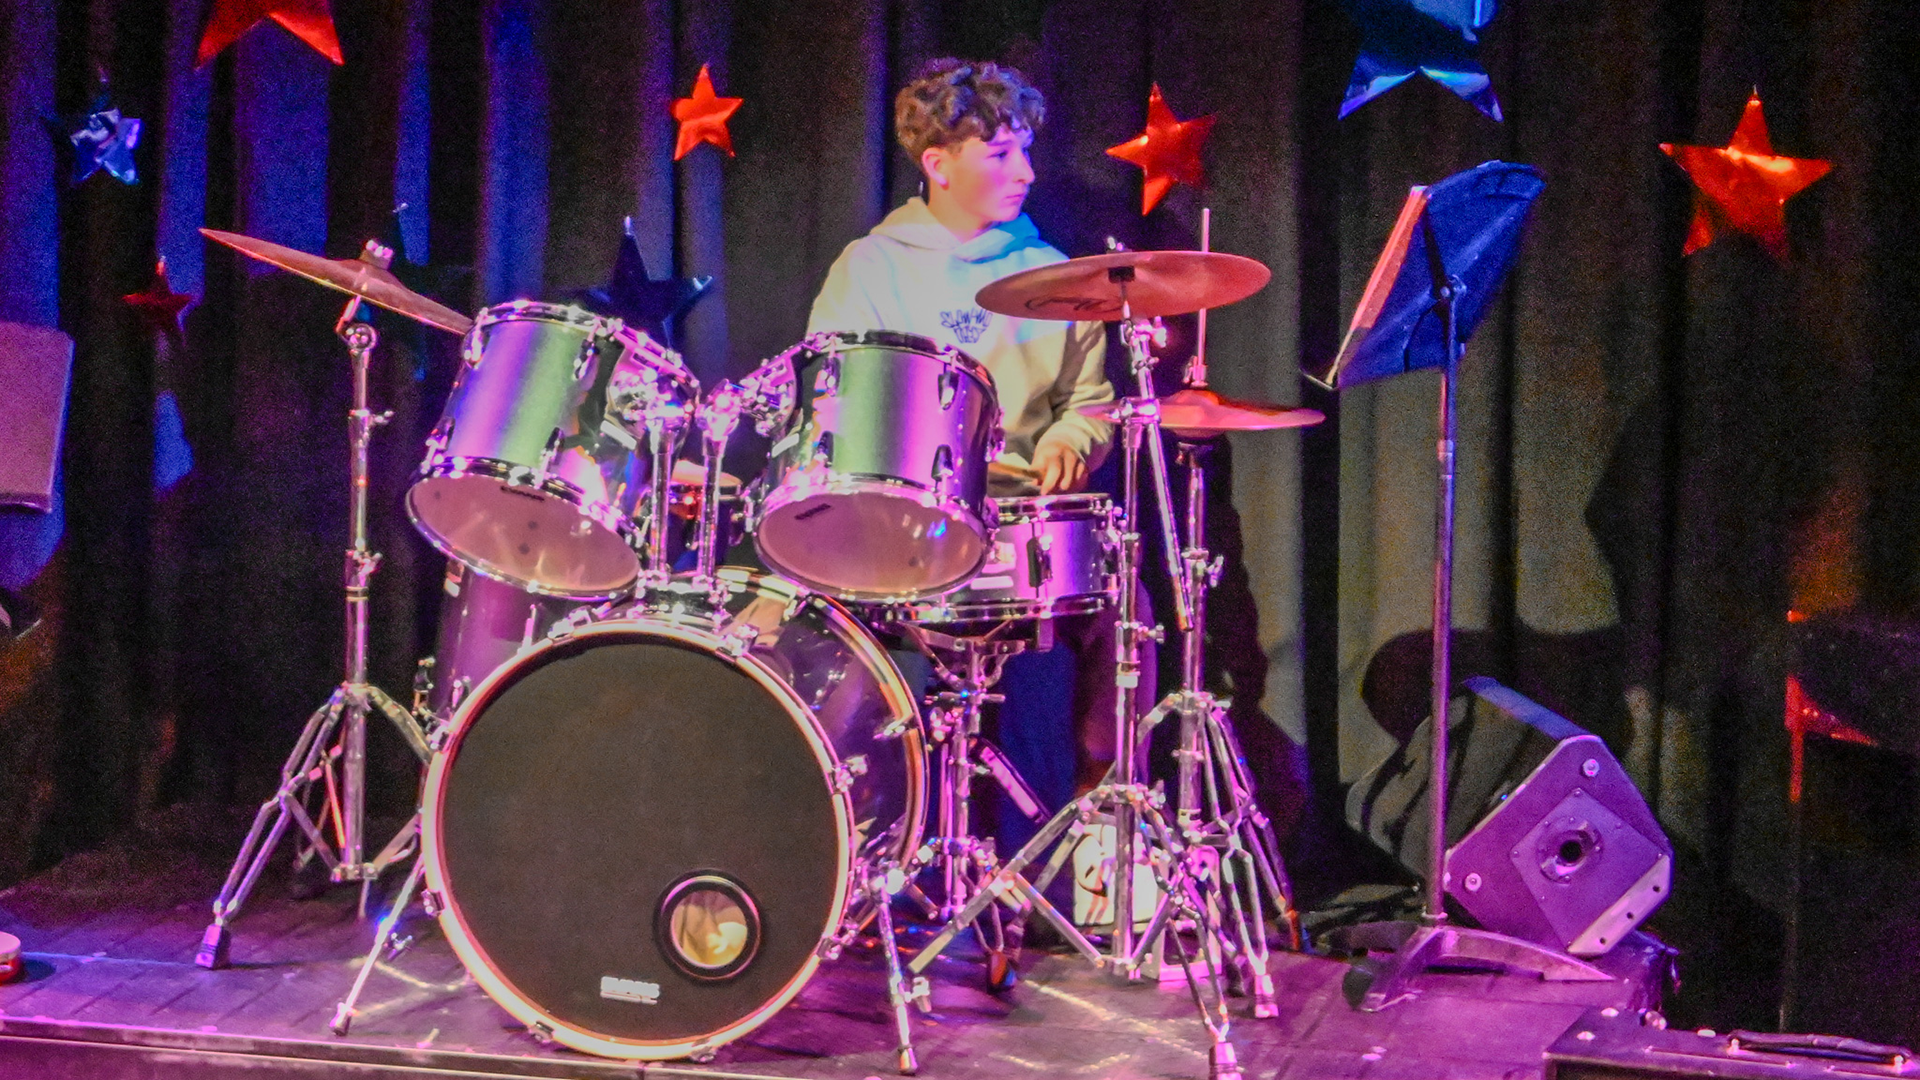 Boy on drums performing on stage at the Freemen's LIVE show